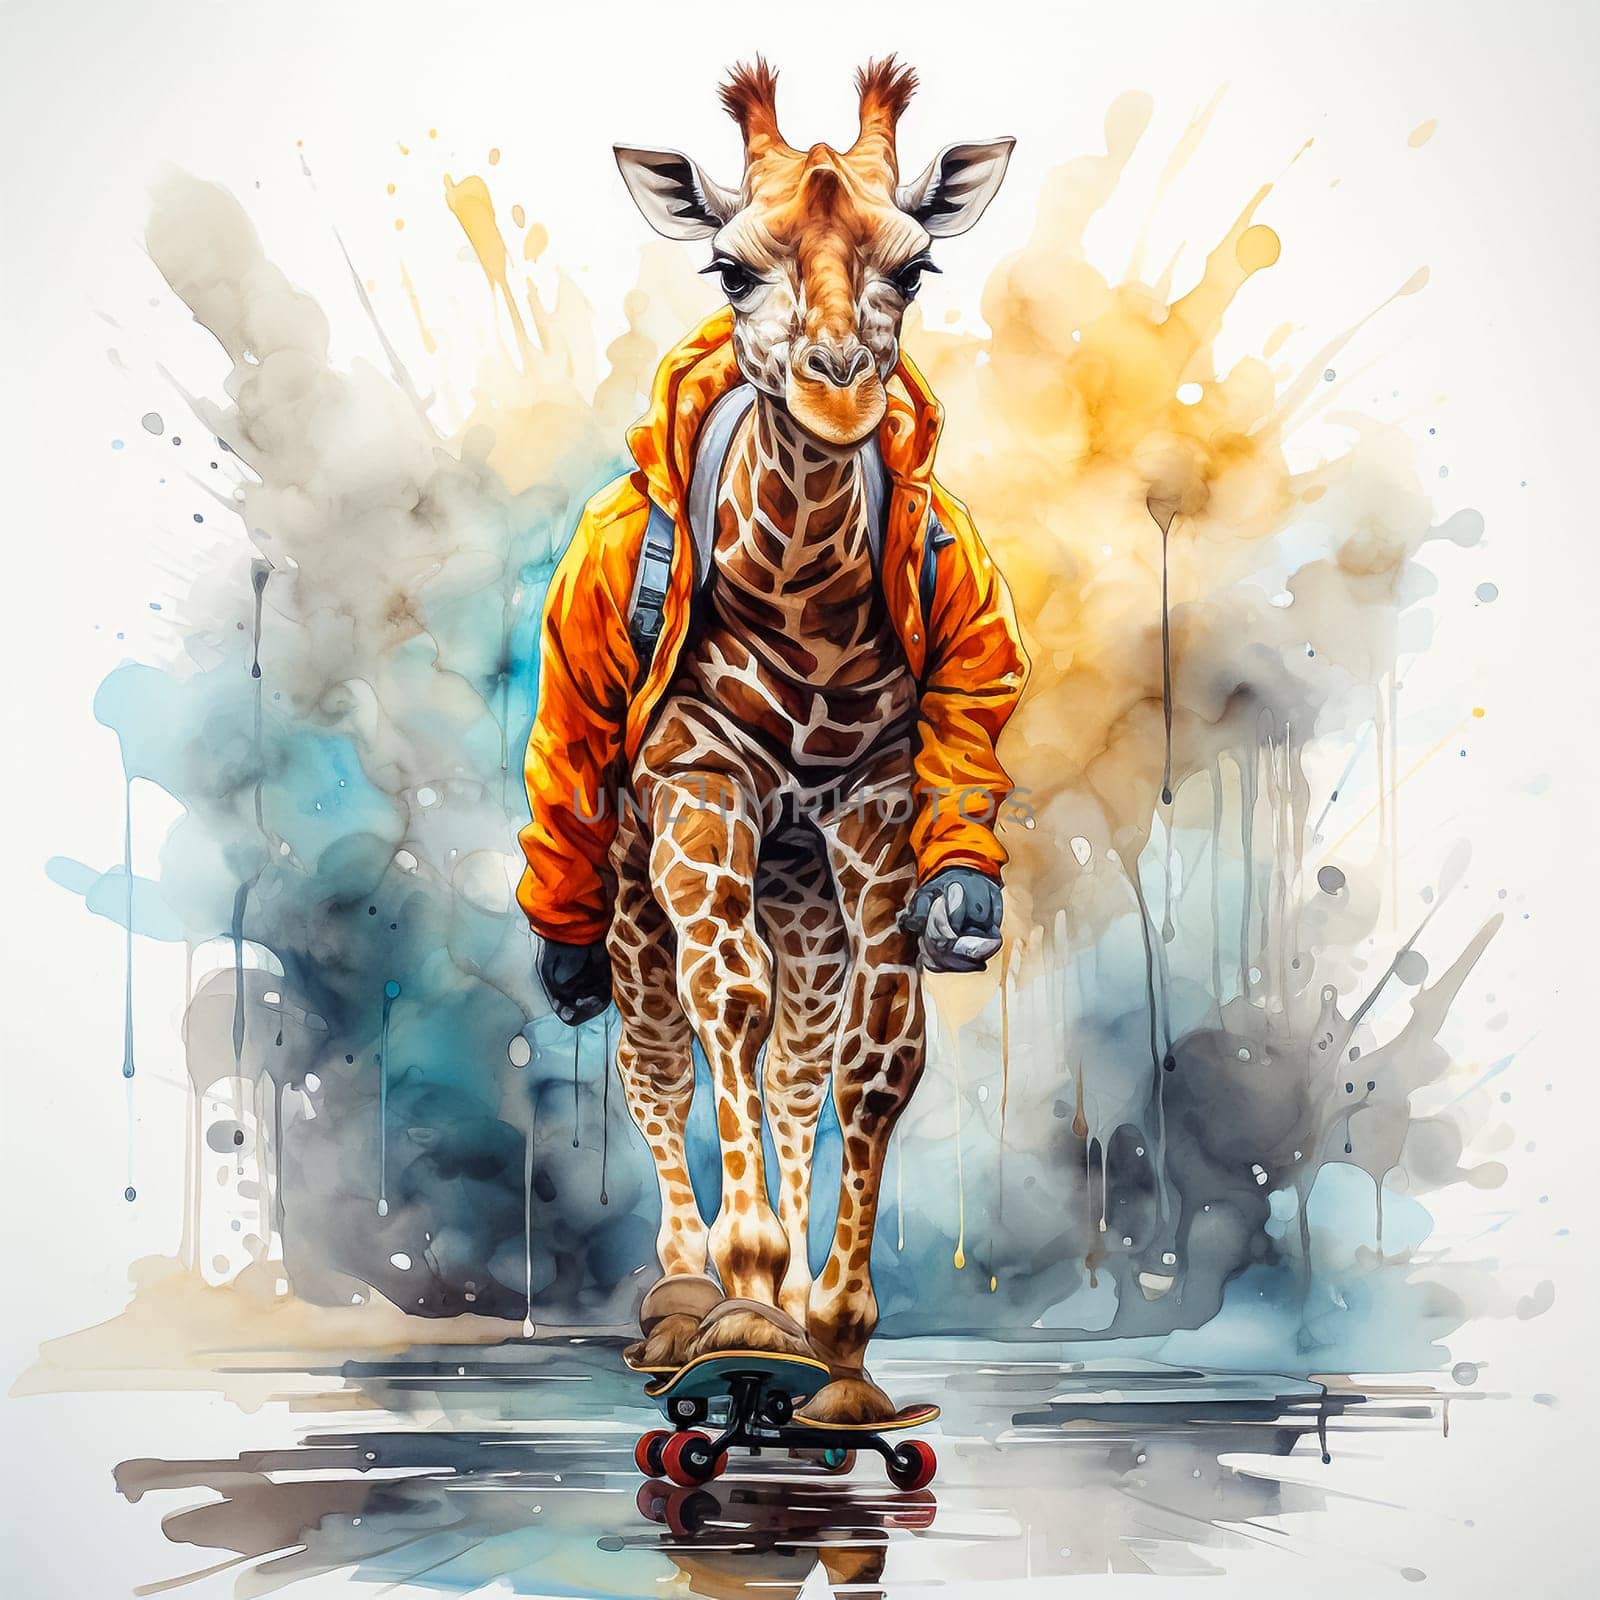 A watercolor illustration of a fashionable giraffe on a skateboard that combines whimsy with urban cool.